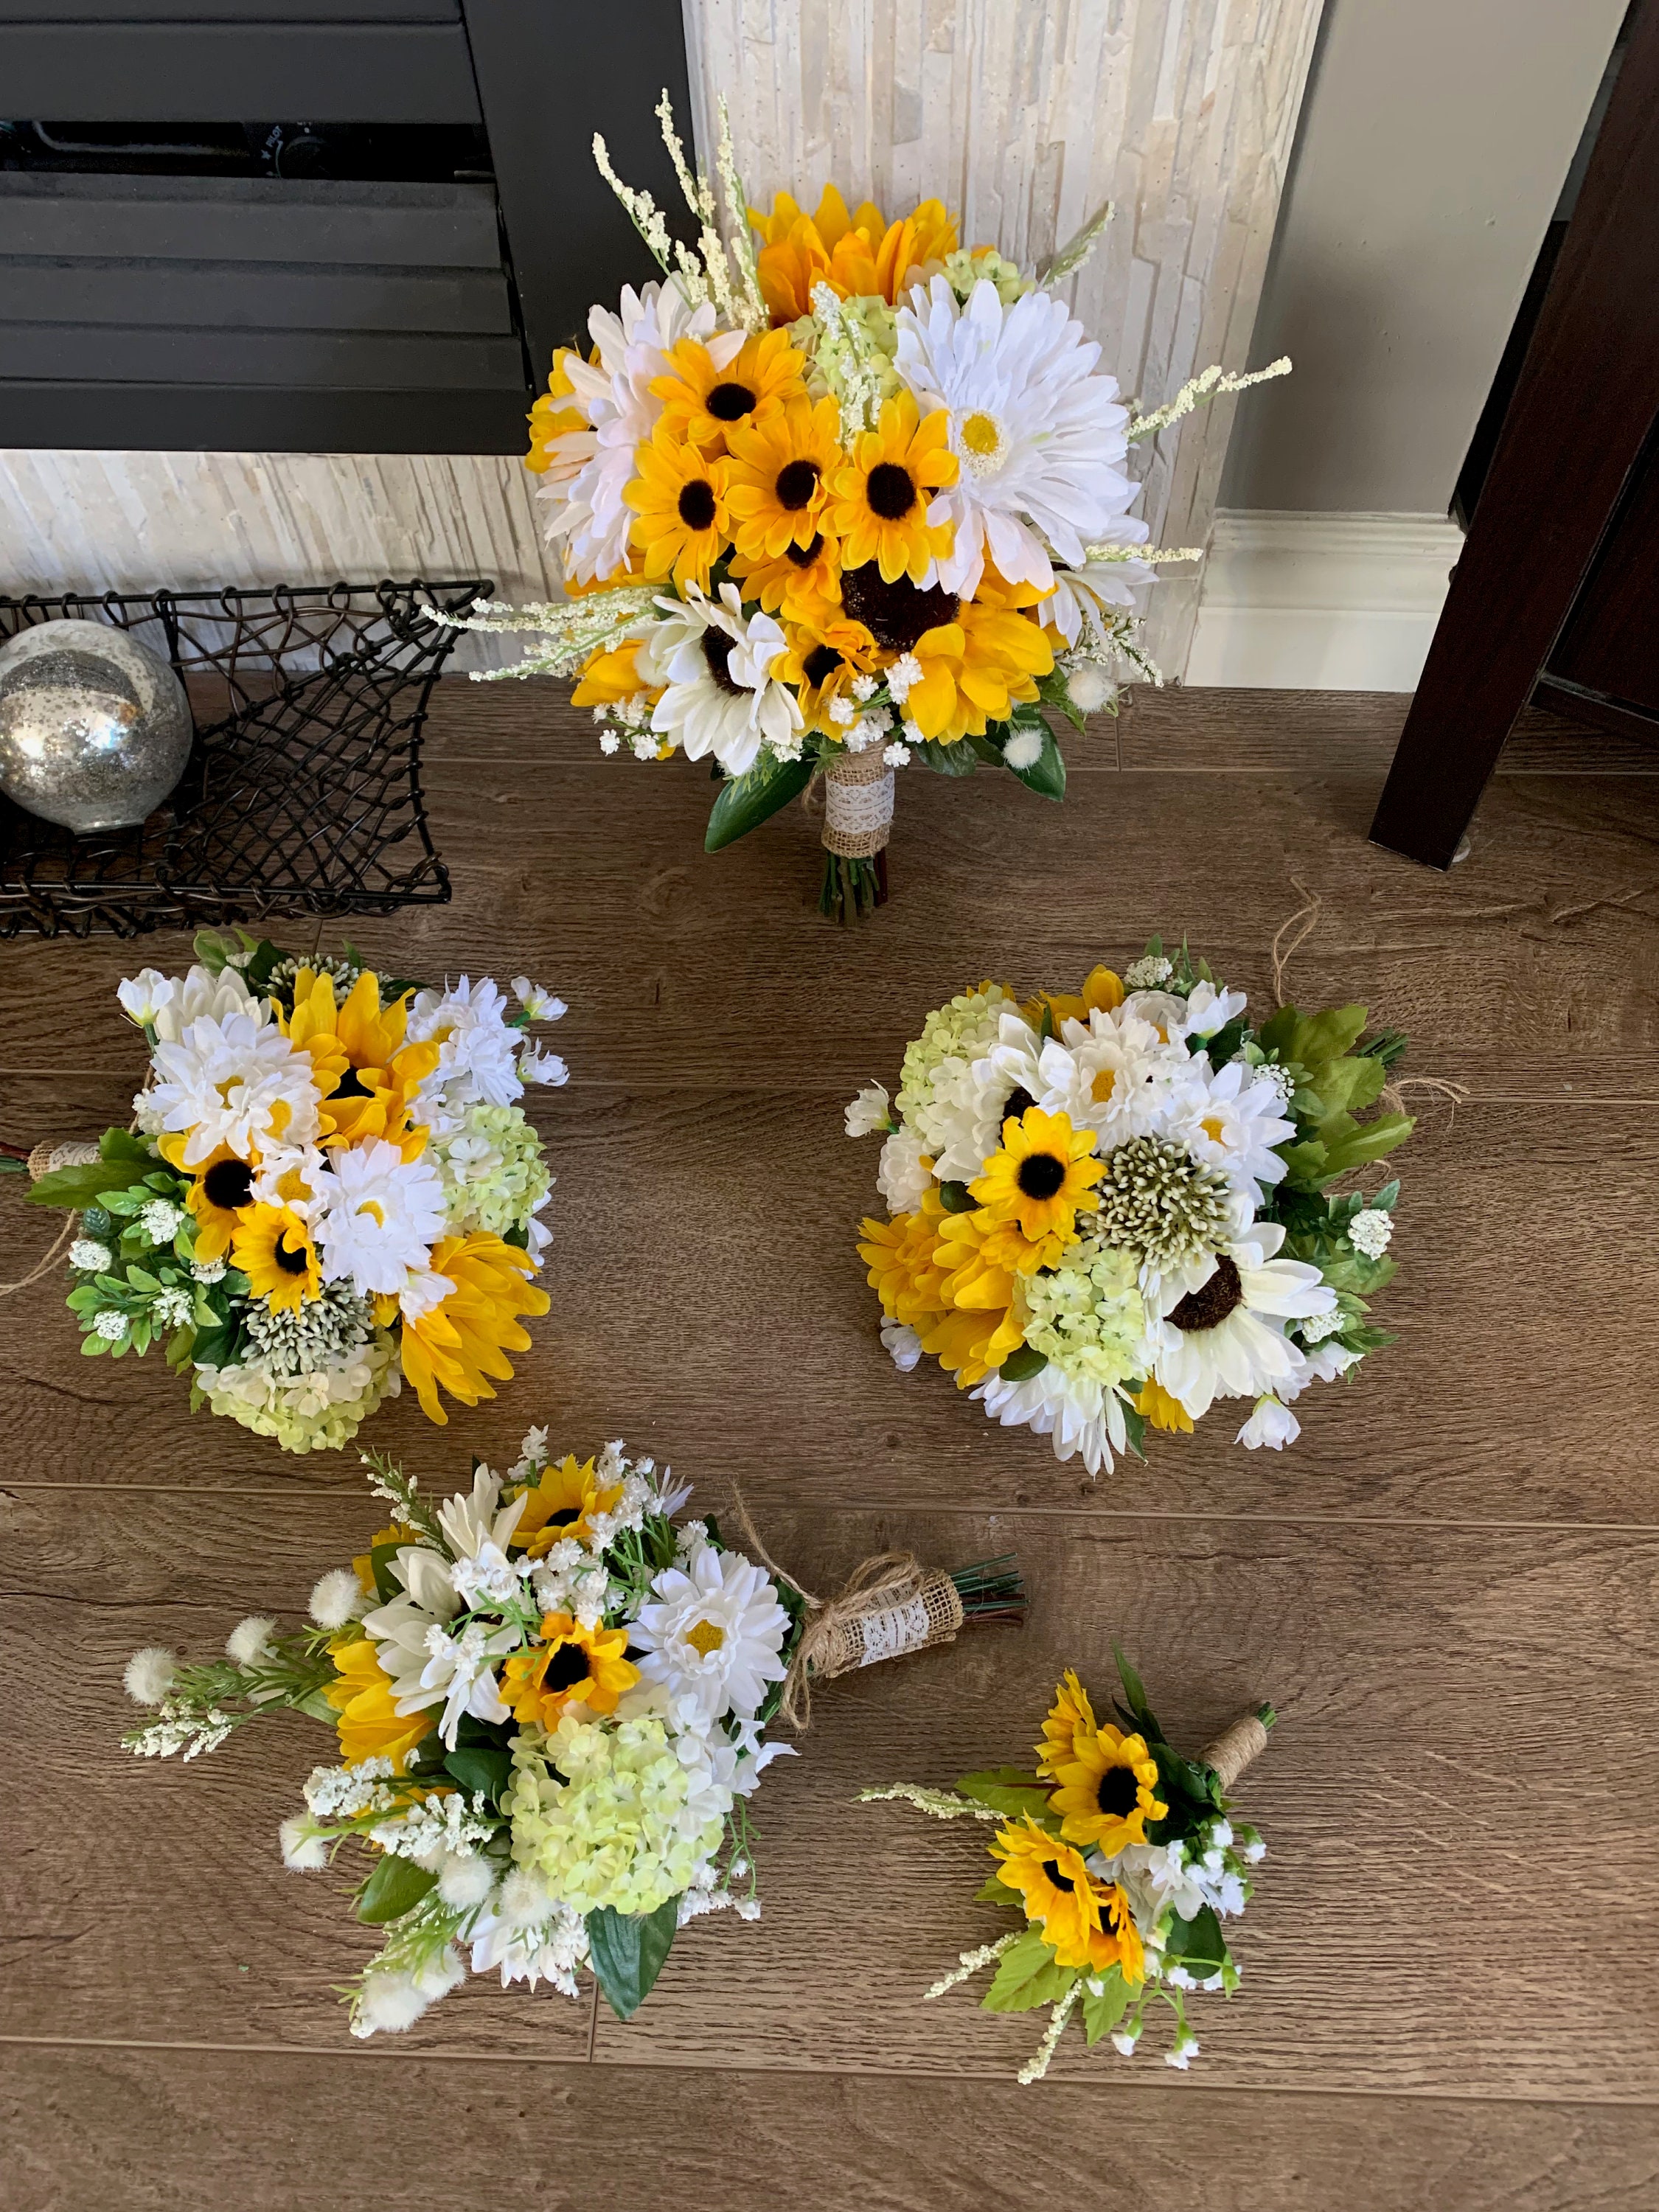 Cogfs 13 Heads White Sunflowers Artificial Flowers, Fake Silk Sunflower  with Stem Vintage Fall Sunflower Decor for Garden Home Wedding Party  Birthday